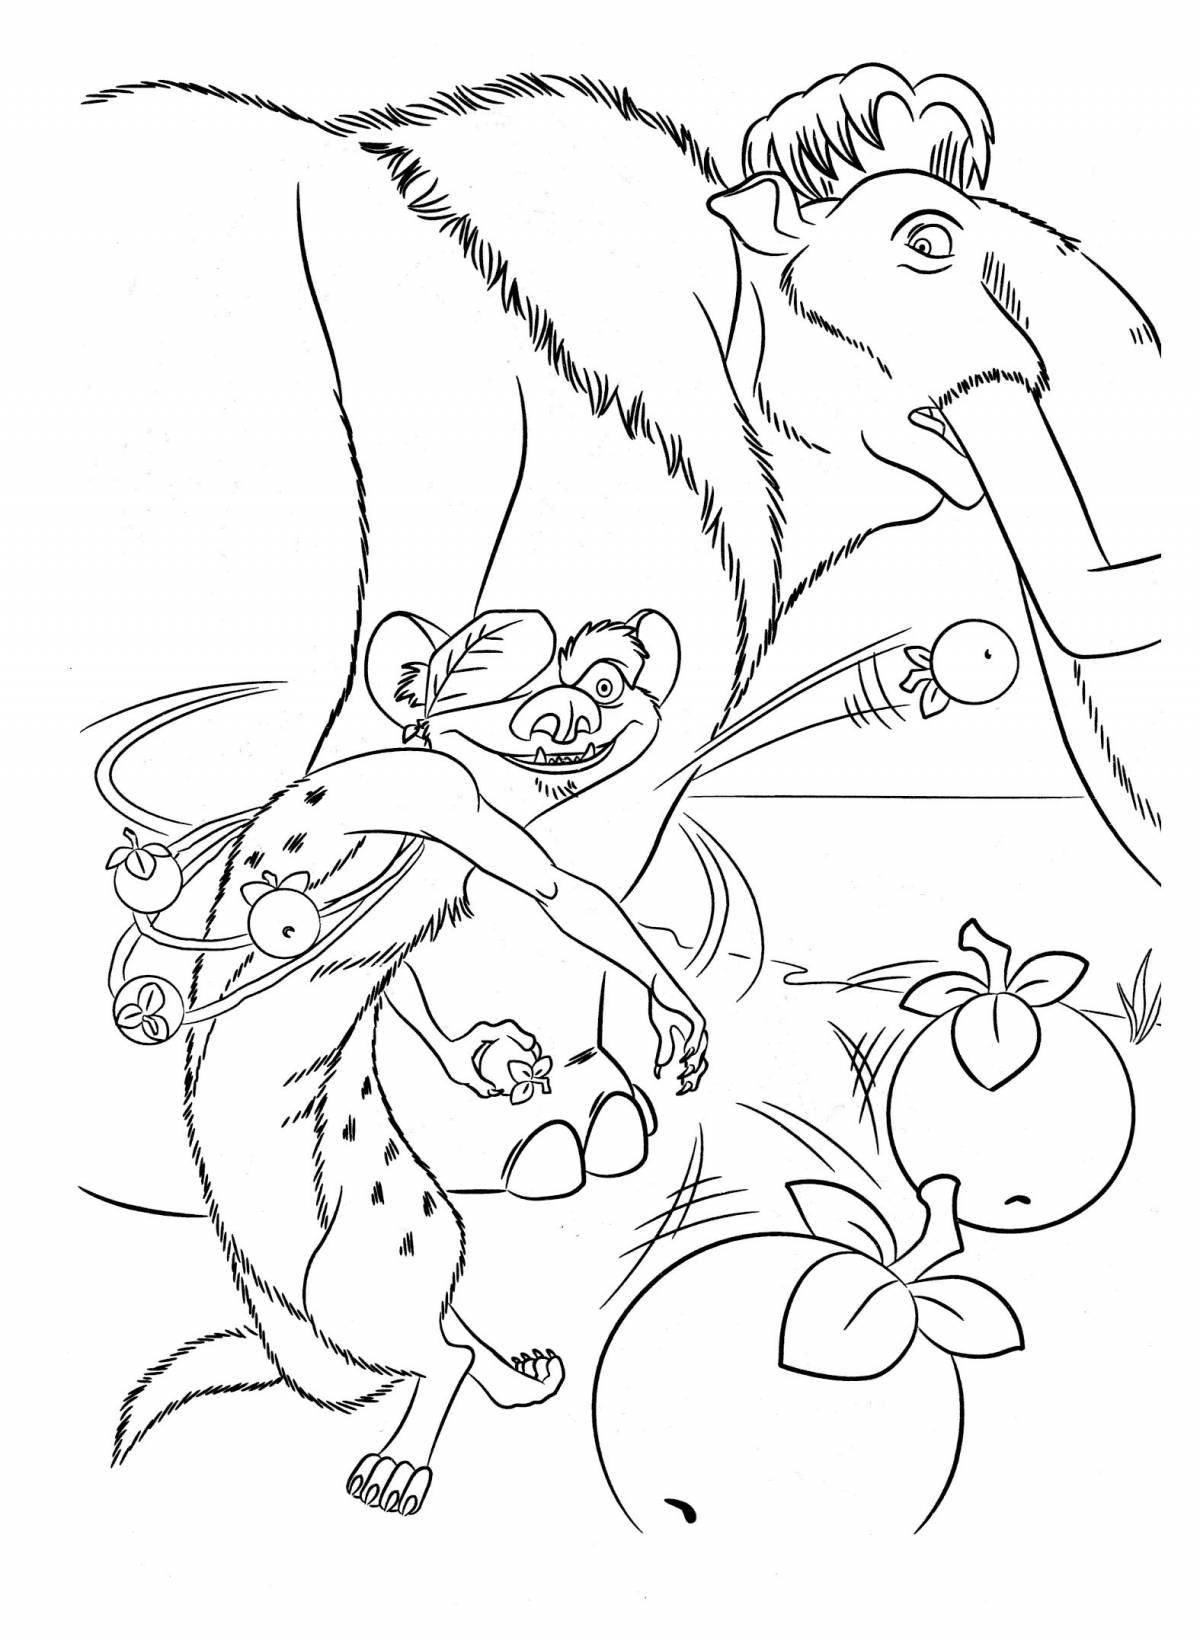 Charming tank ice age coloring book